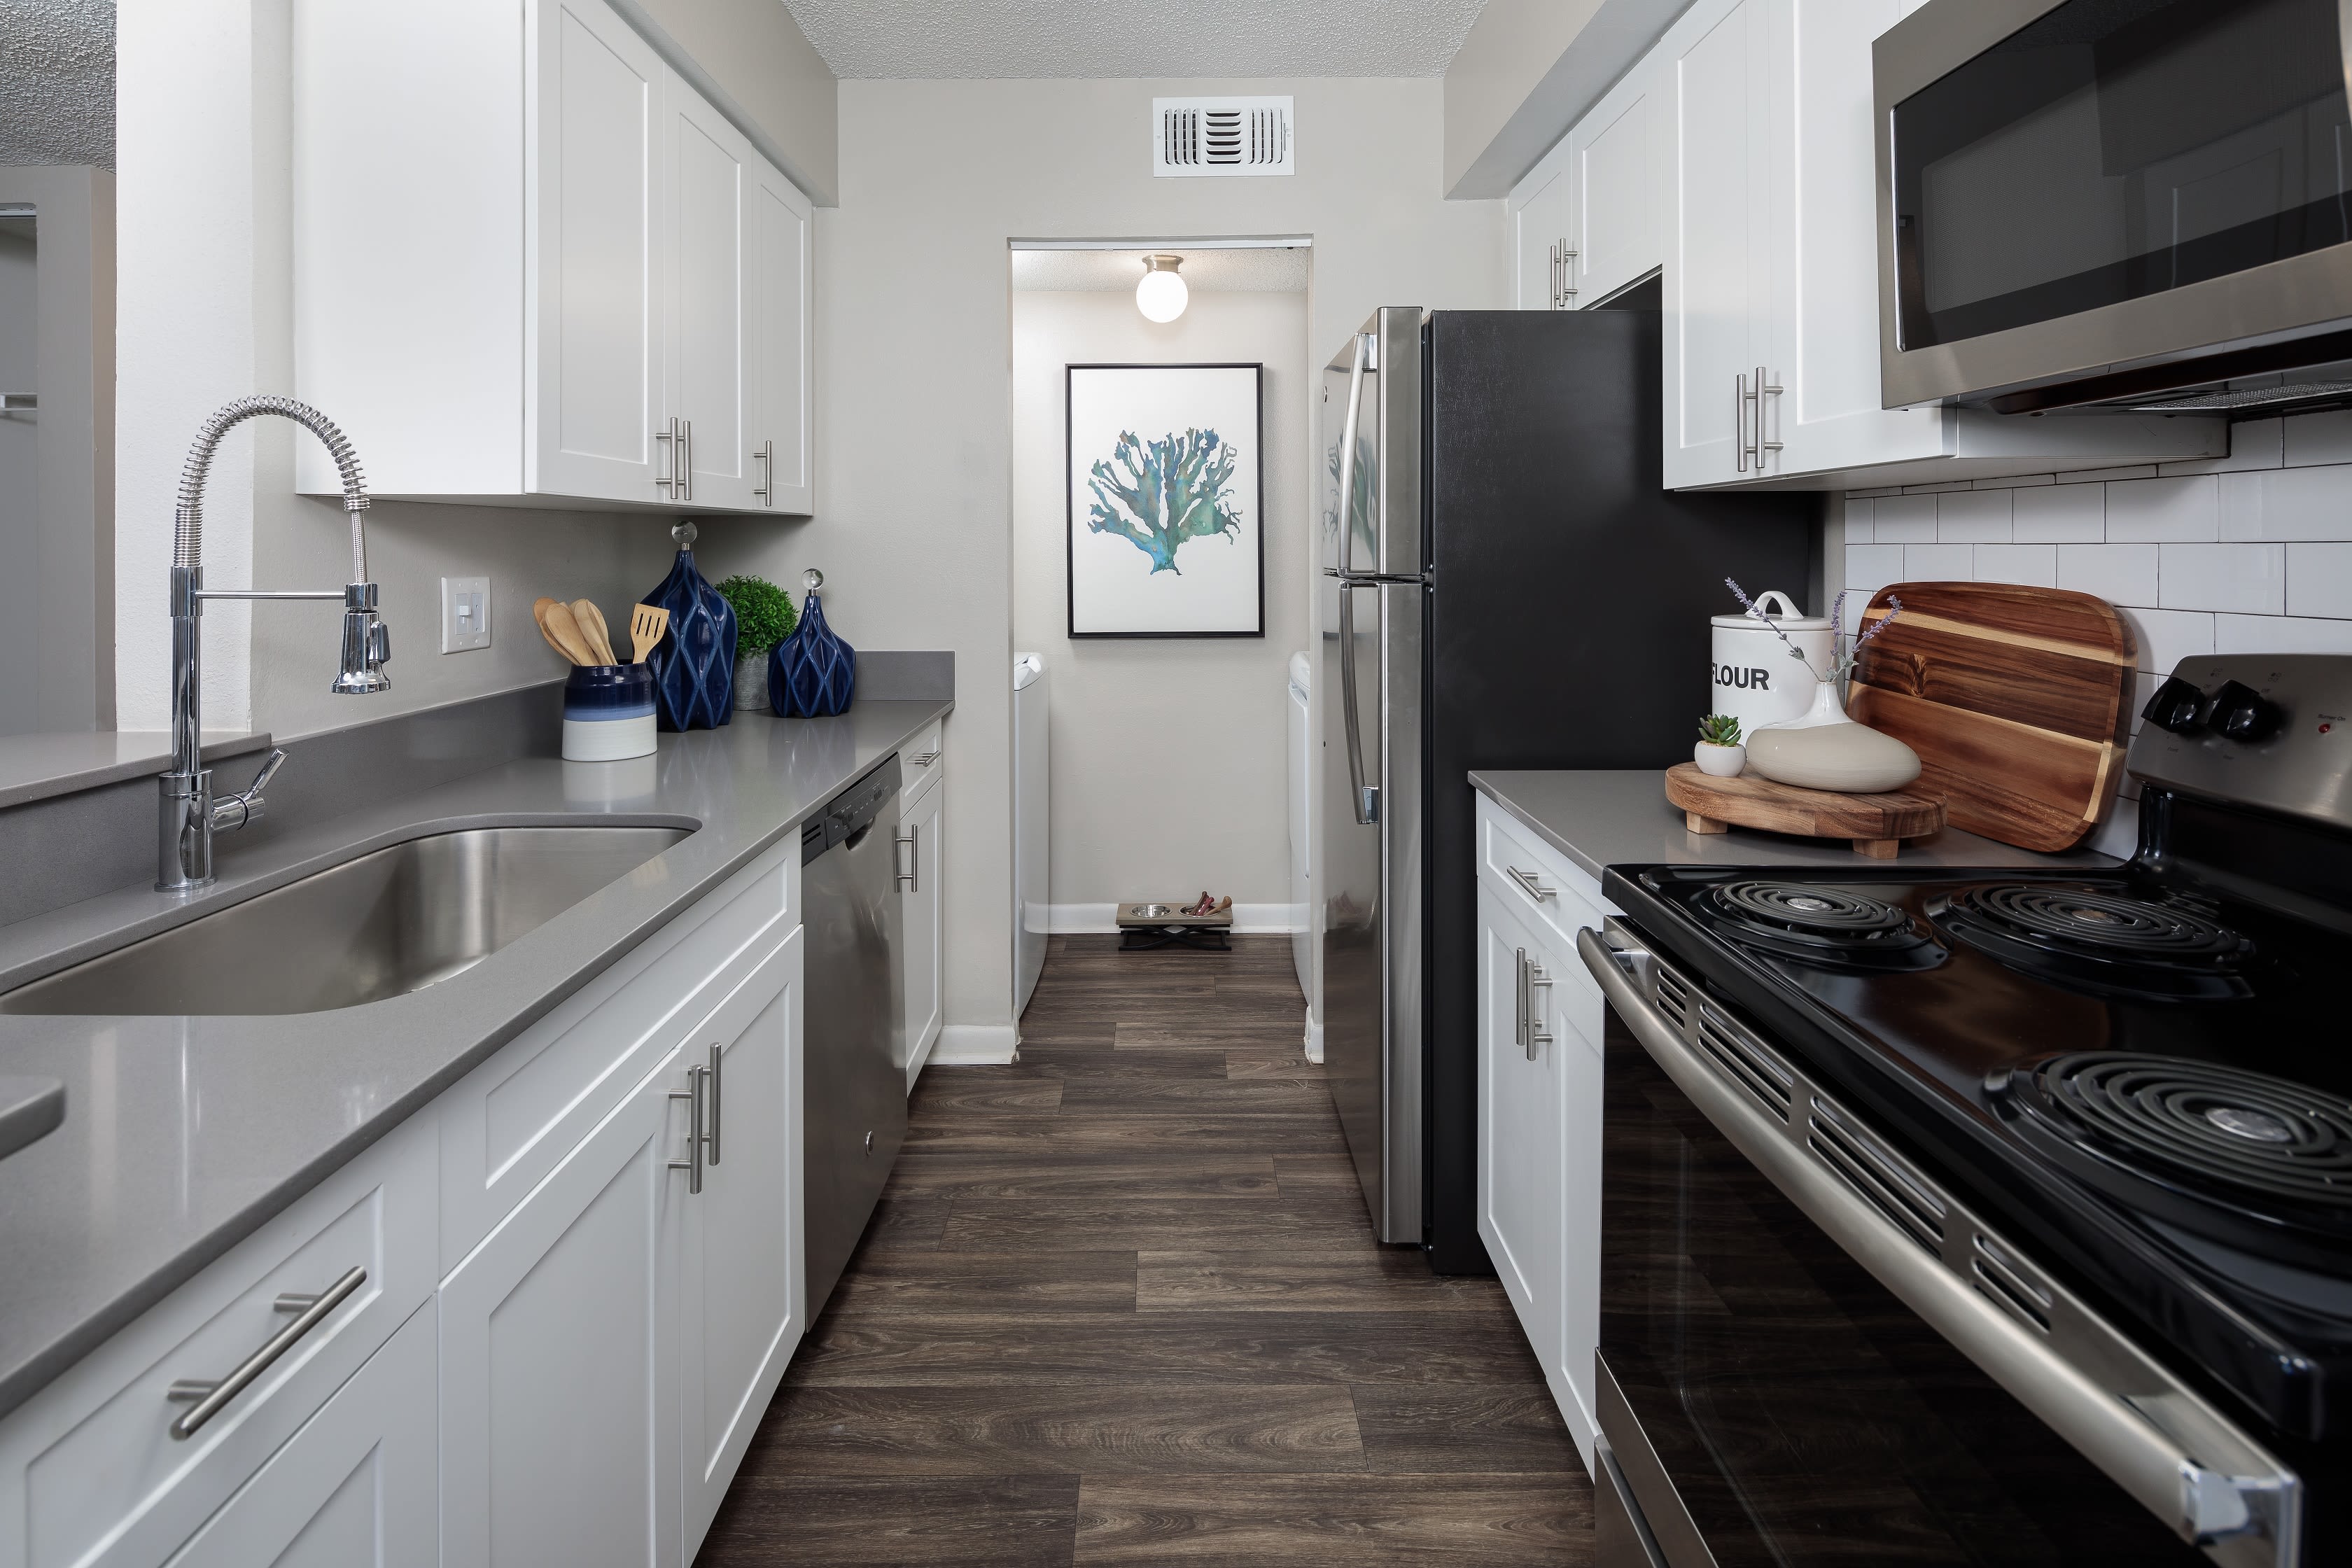 An apartment kitchen at Onyx Winter Park in Casselberry, FL